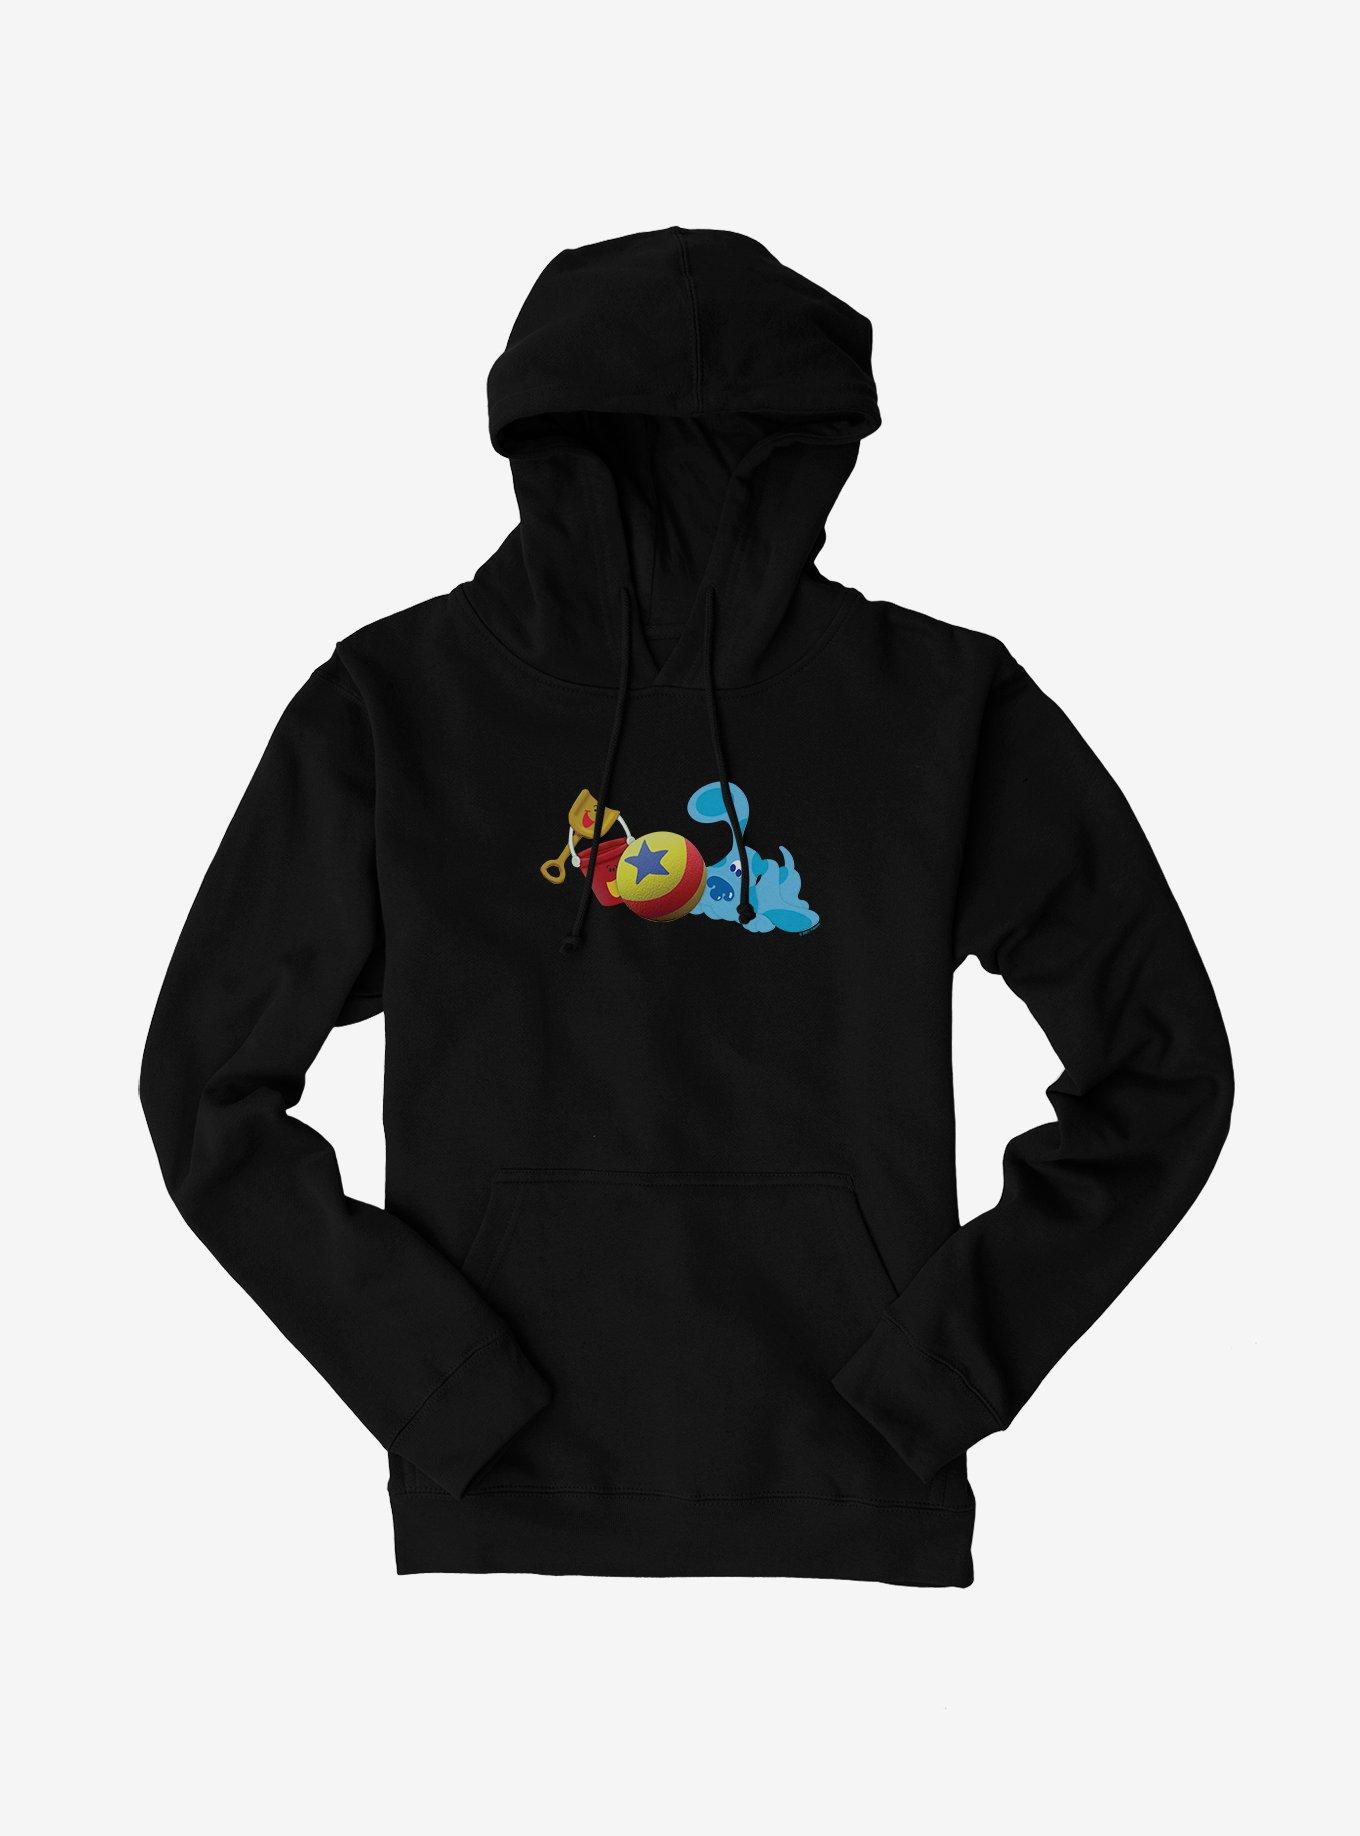 Blue's Clues Shovel And Pail Playtime Hoodie